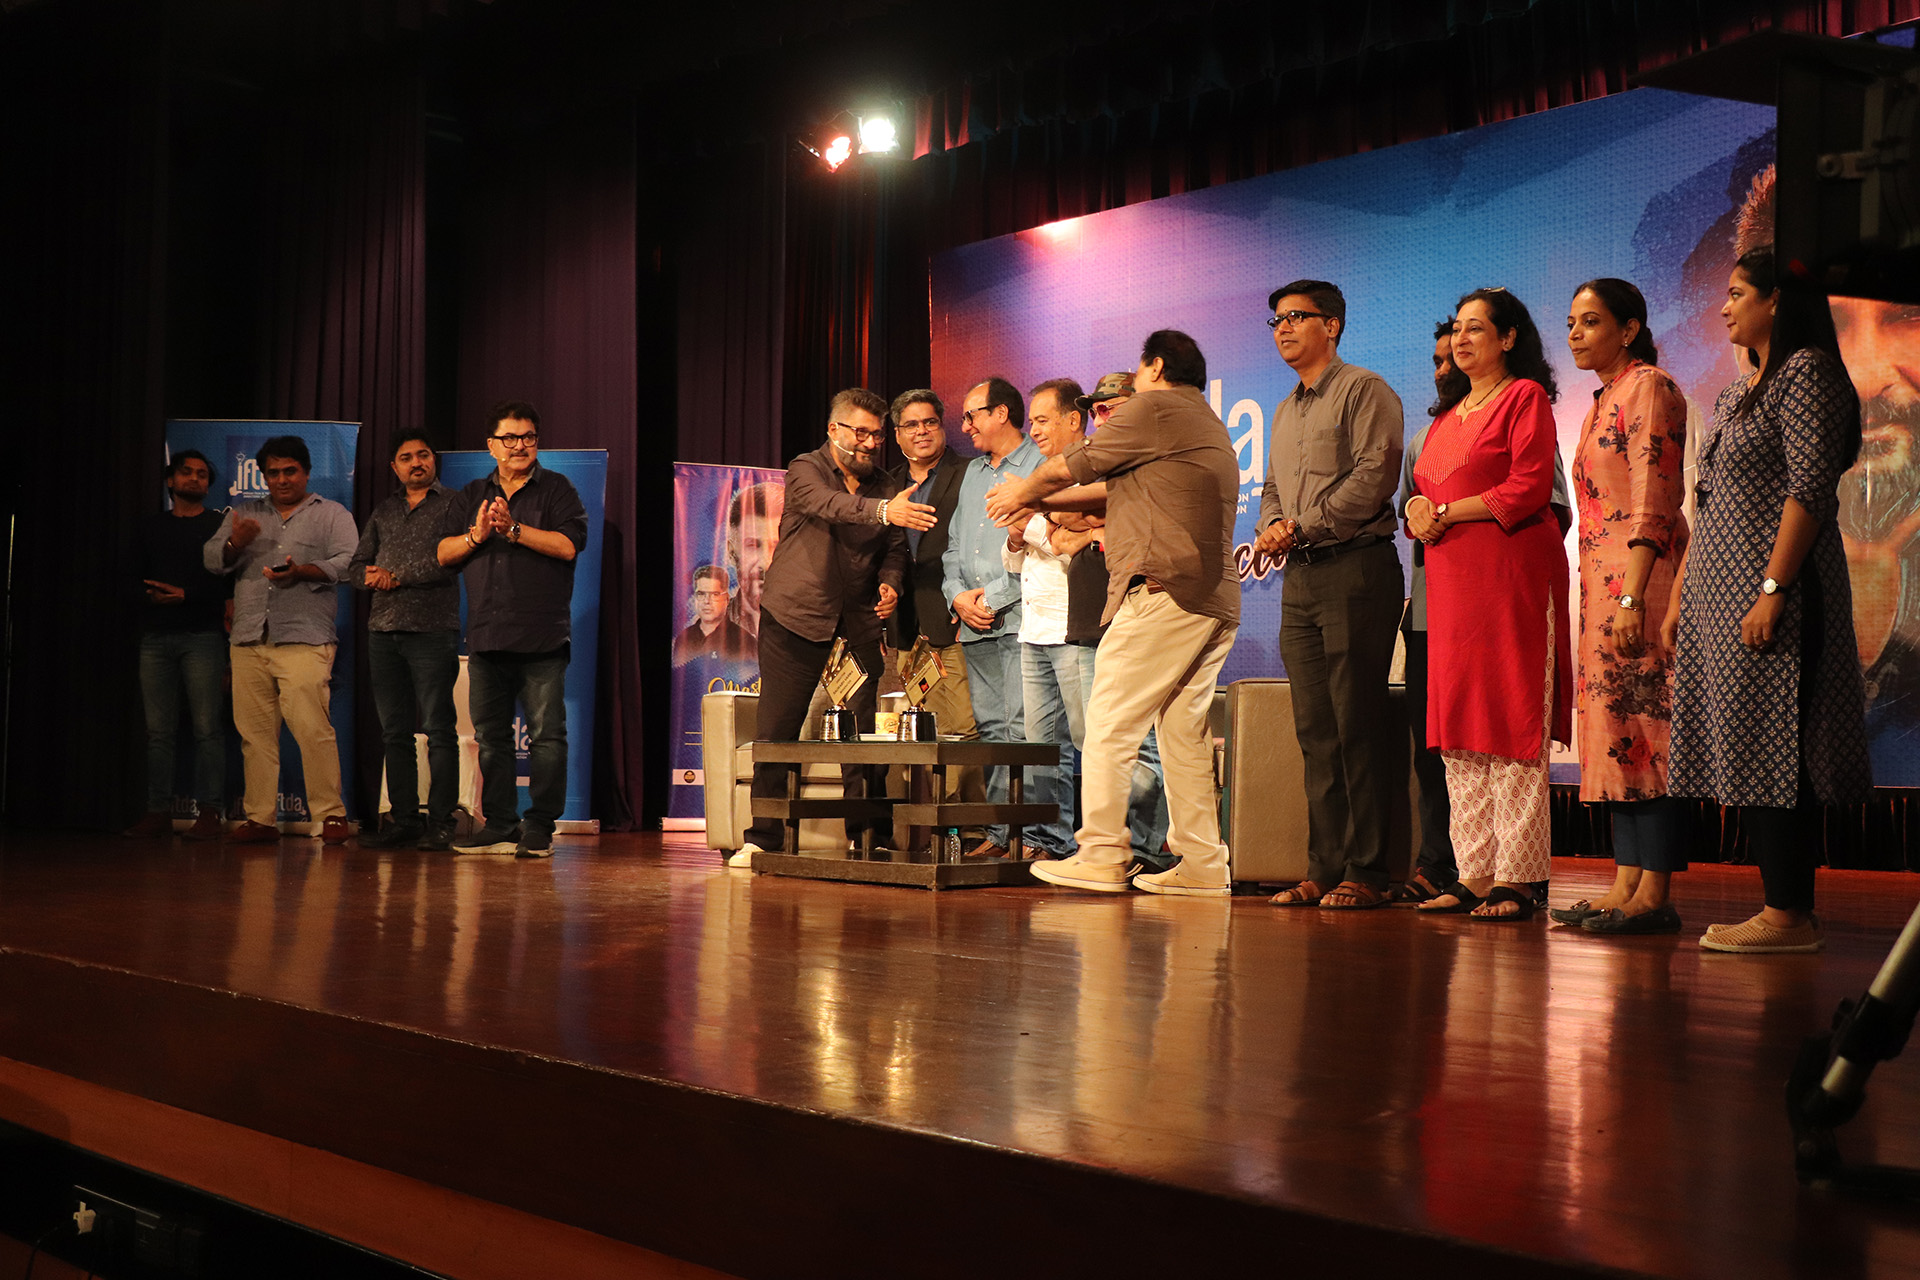 Truly memorable experience for our diploma actors in Vivek Agnihotri's masterclass organised by IFTDA (Indian Film and Television Directors Association).